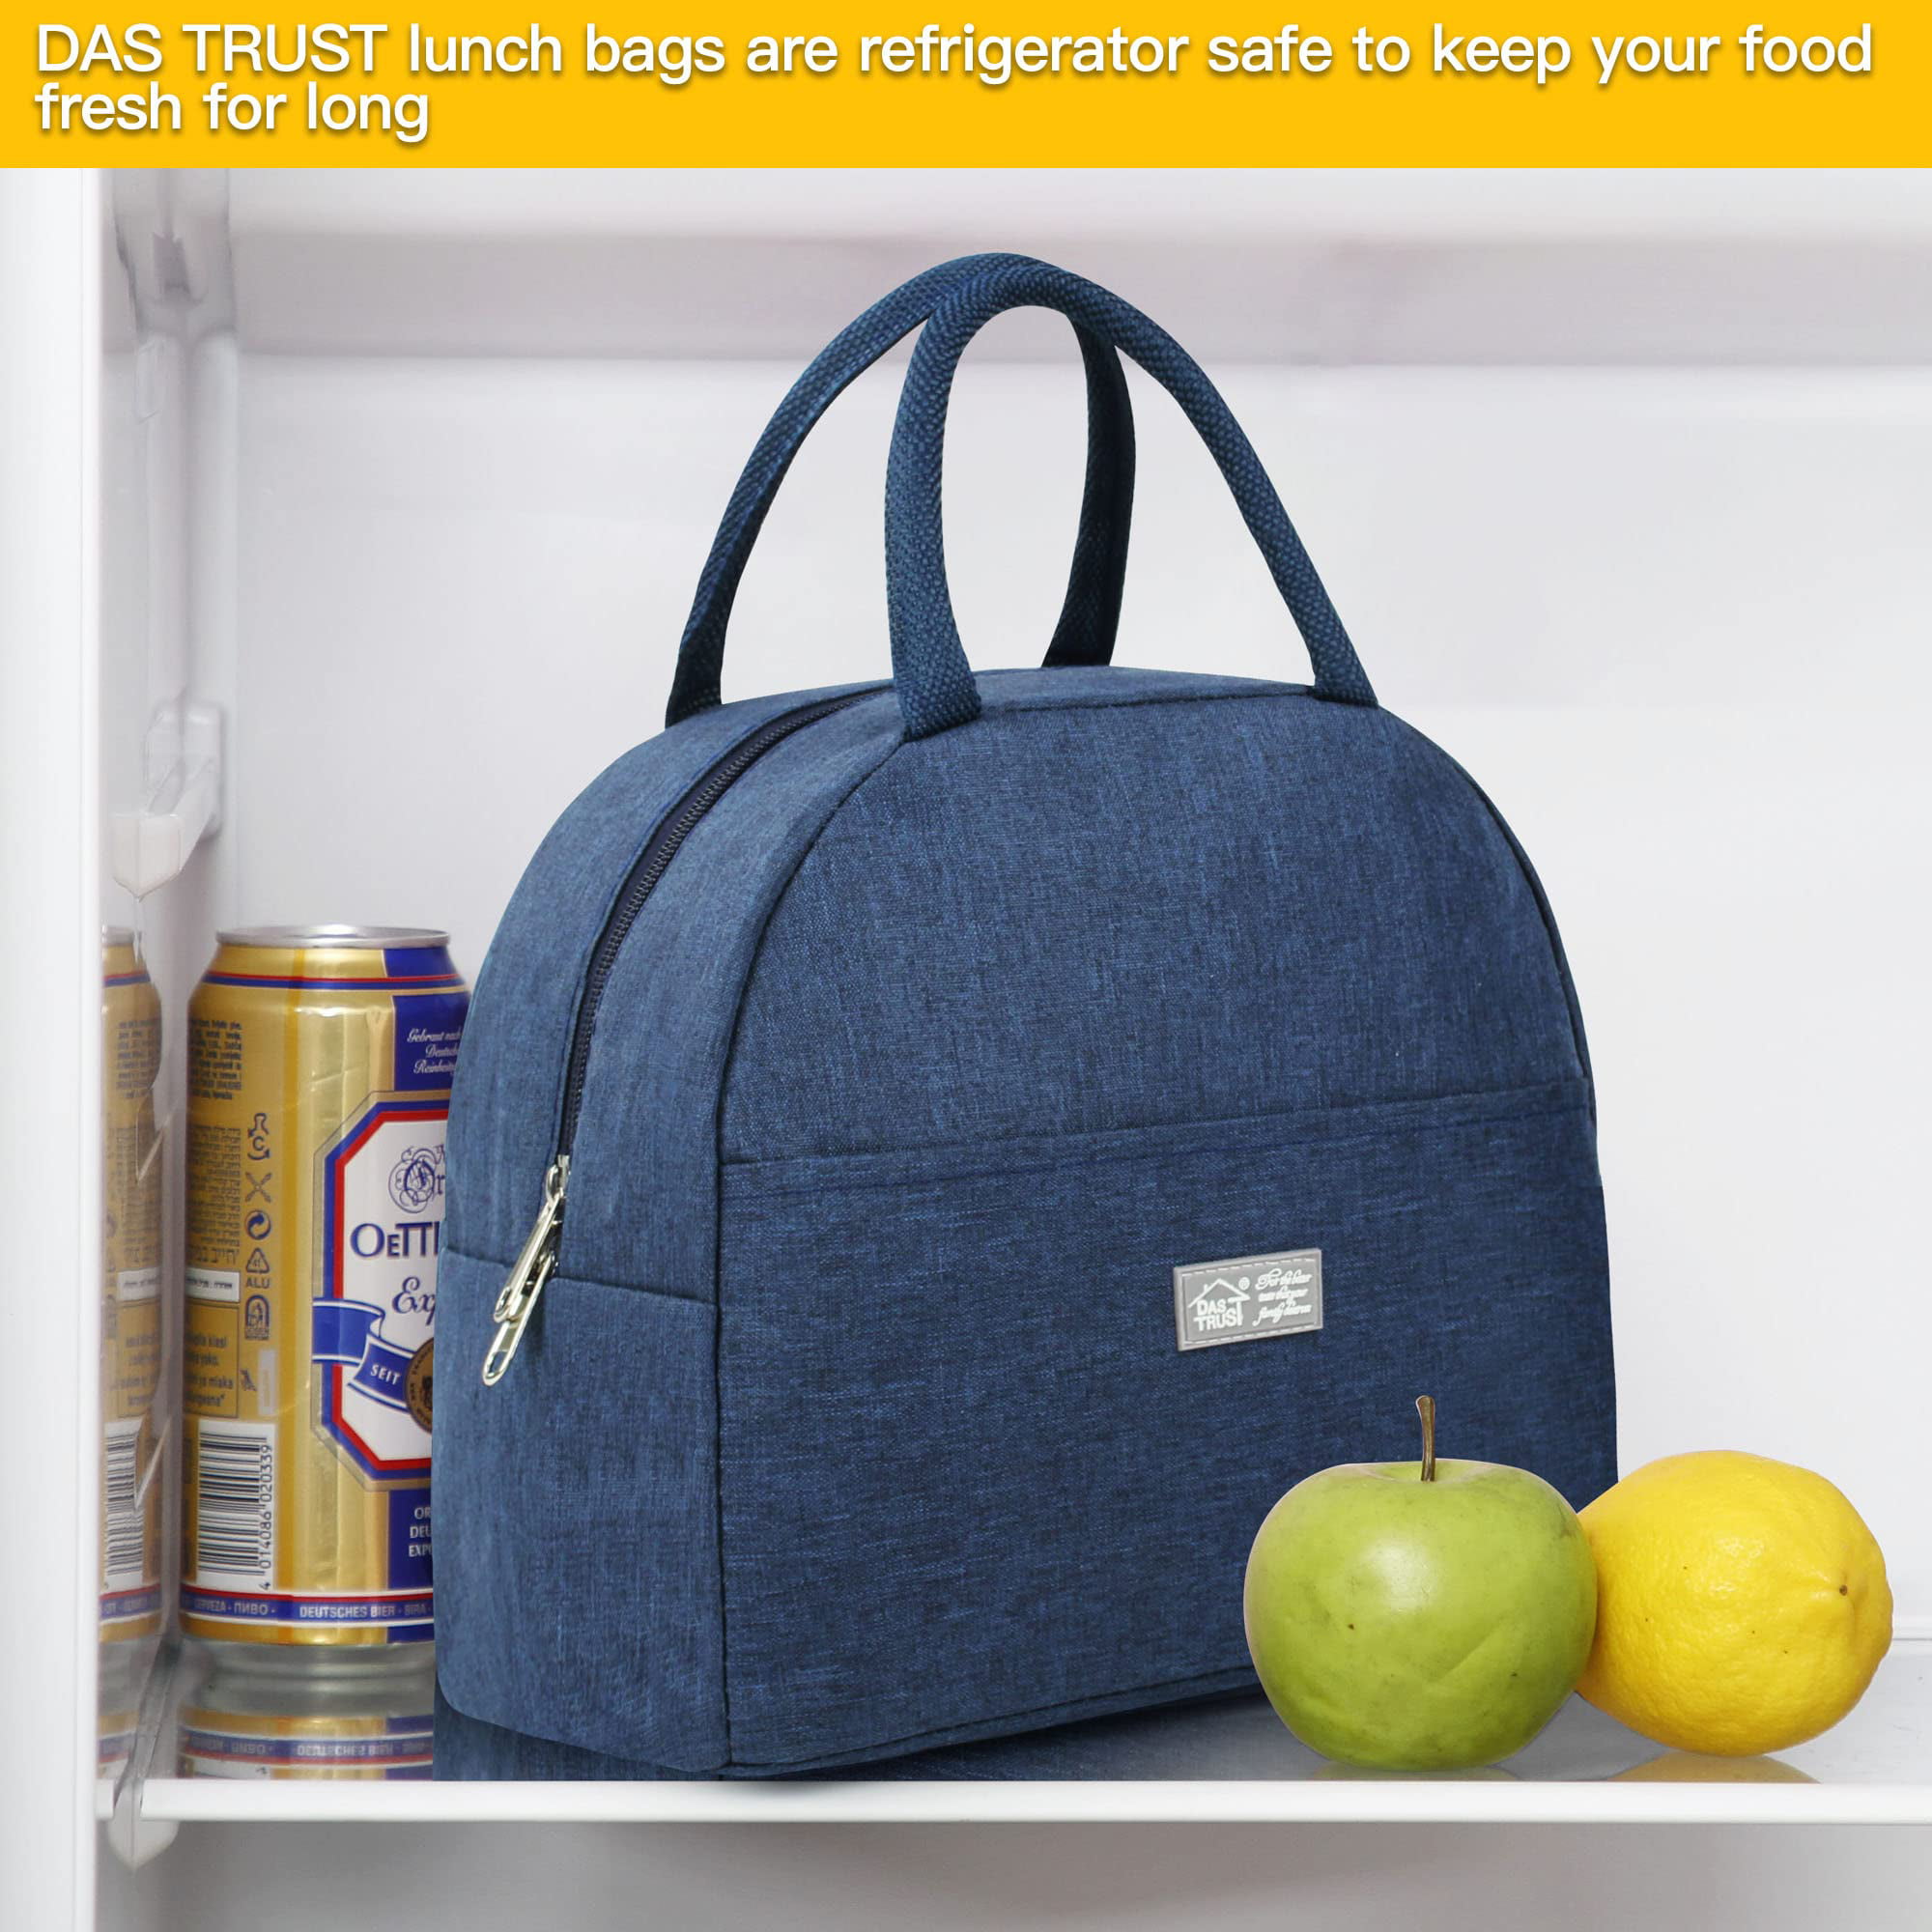 Pjtewawe lunch bag lunch bag women teens insulated lunch box men adult  lunchbox lunch tote reusable meal prep container bag bento box cooler bag  for